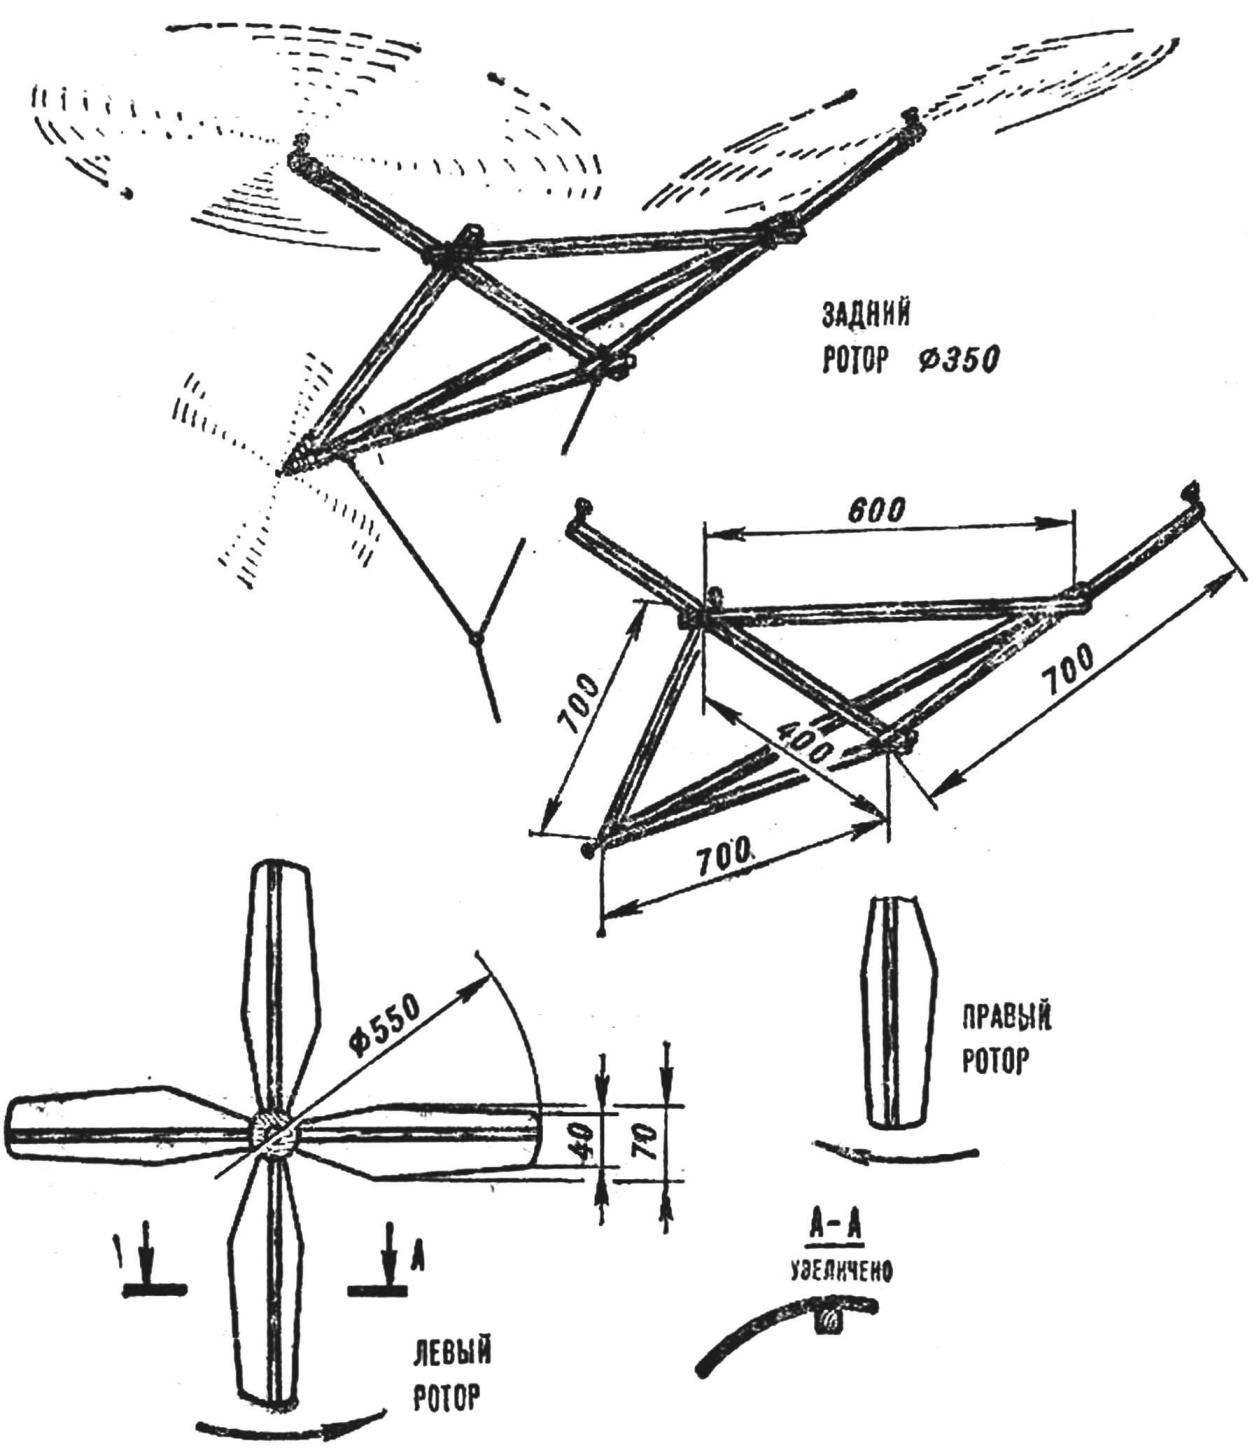 Fig. 3. Snakes helicopter multirotor scheme and its details.